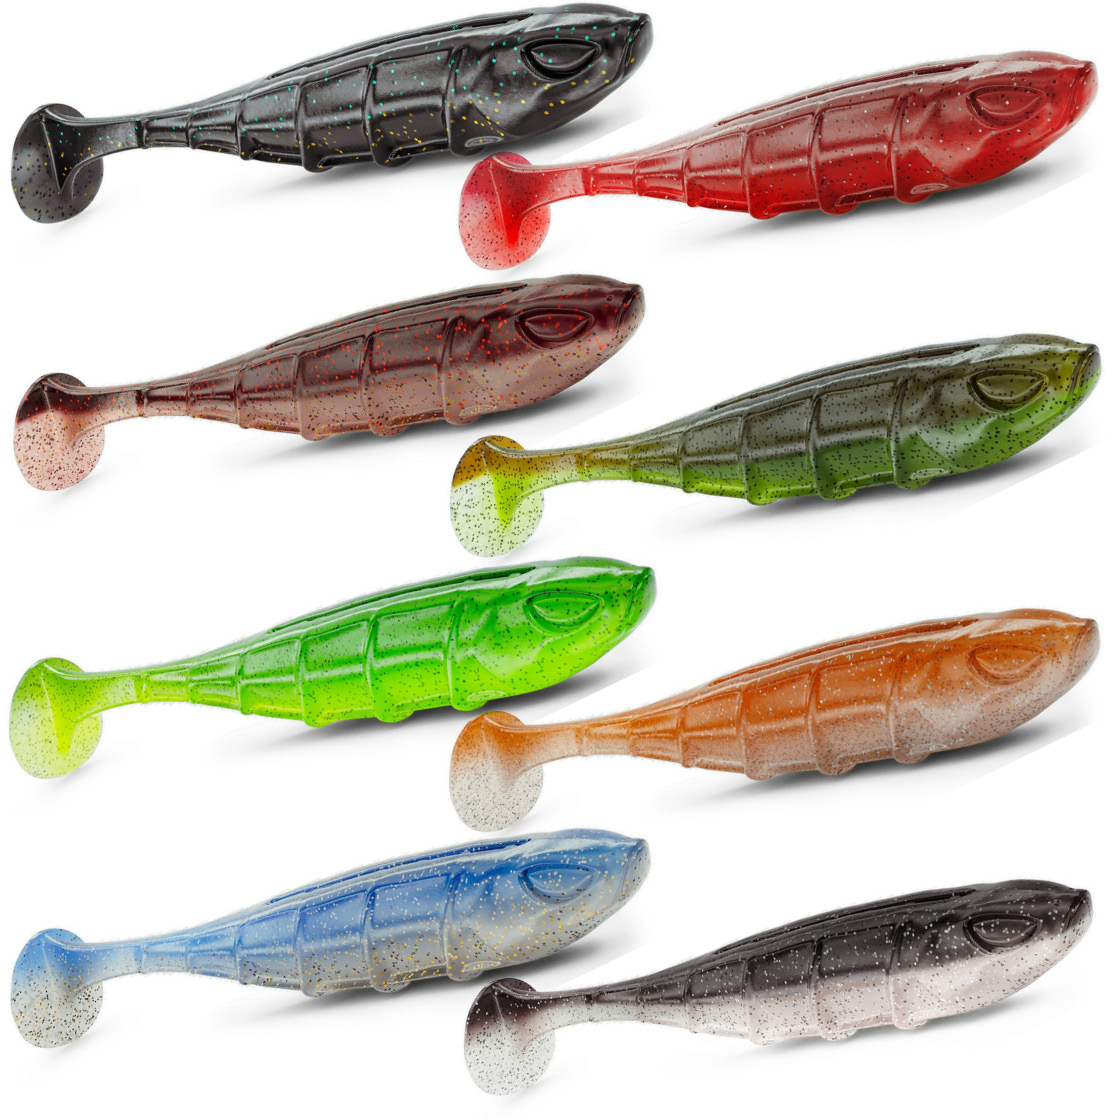 Nays VNM 50 12,7 cm, Softbaits, Lures and Baits, Spin Fishing